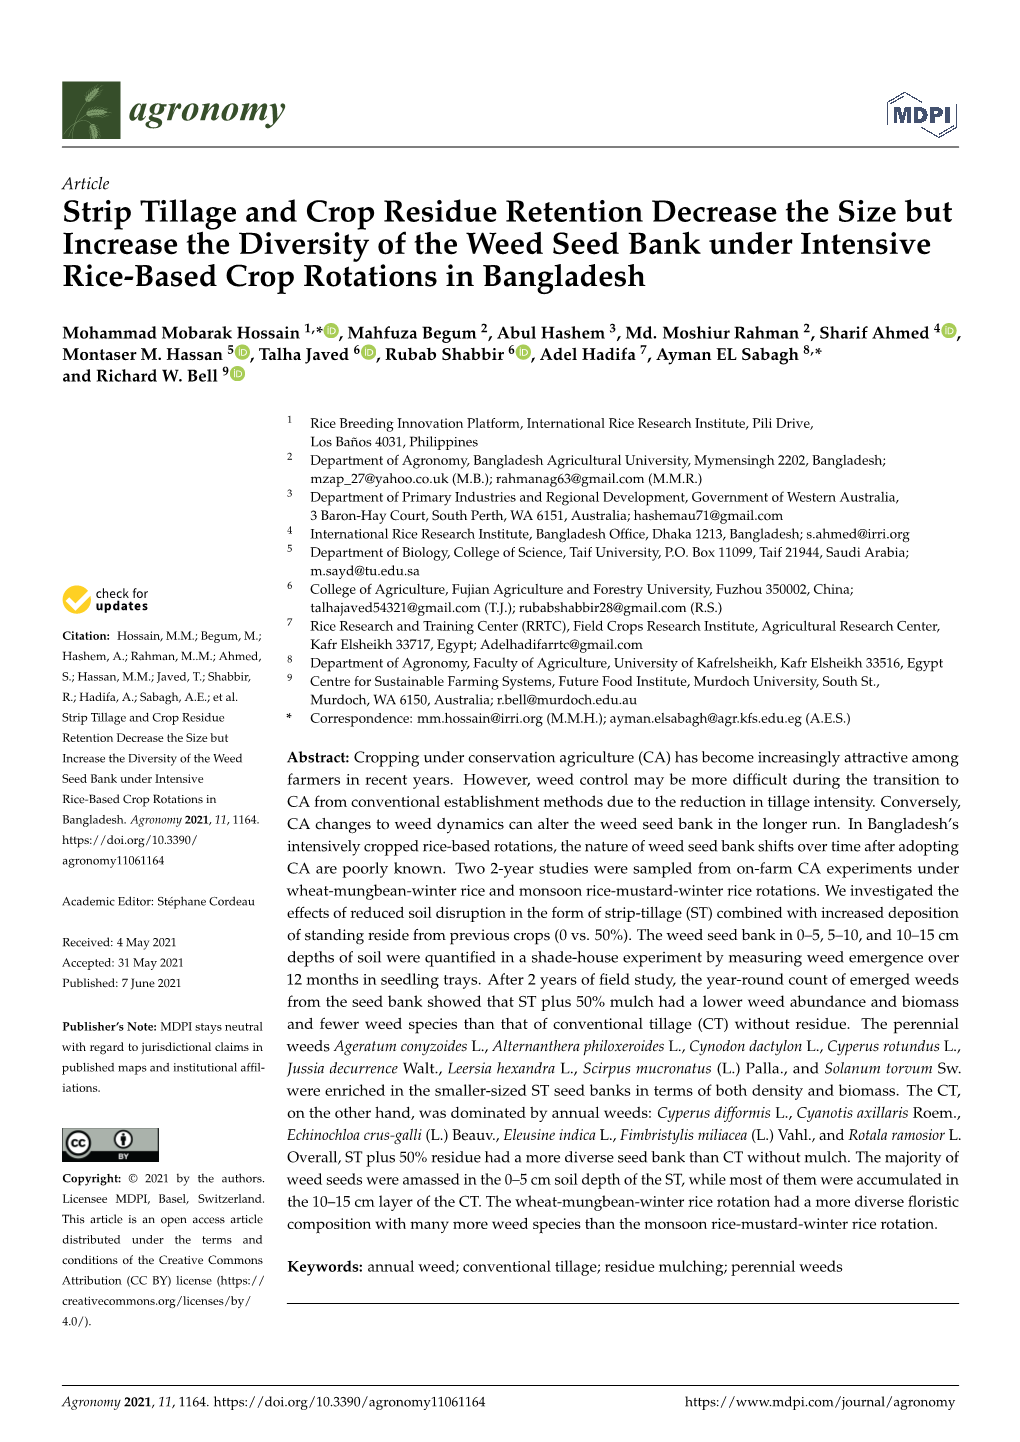 Strip Tillage and Crop Residue Retention Decrease the Size but Increase the Diversity of the Weed Seed Bank Under Intensive Rice-Based Crop Rotations in Bangladesh